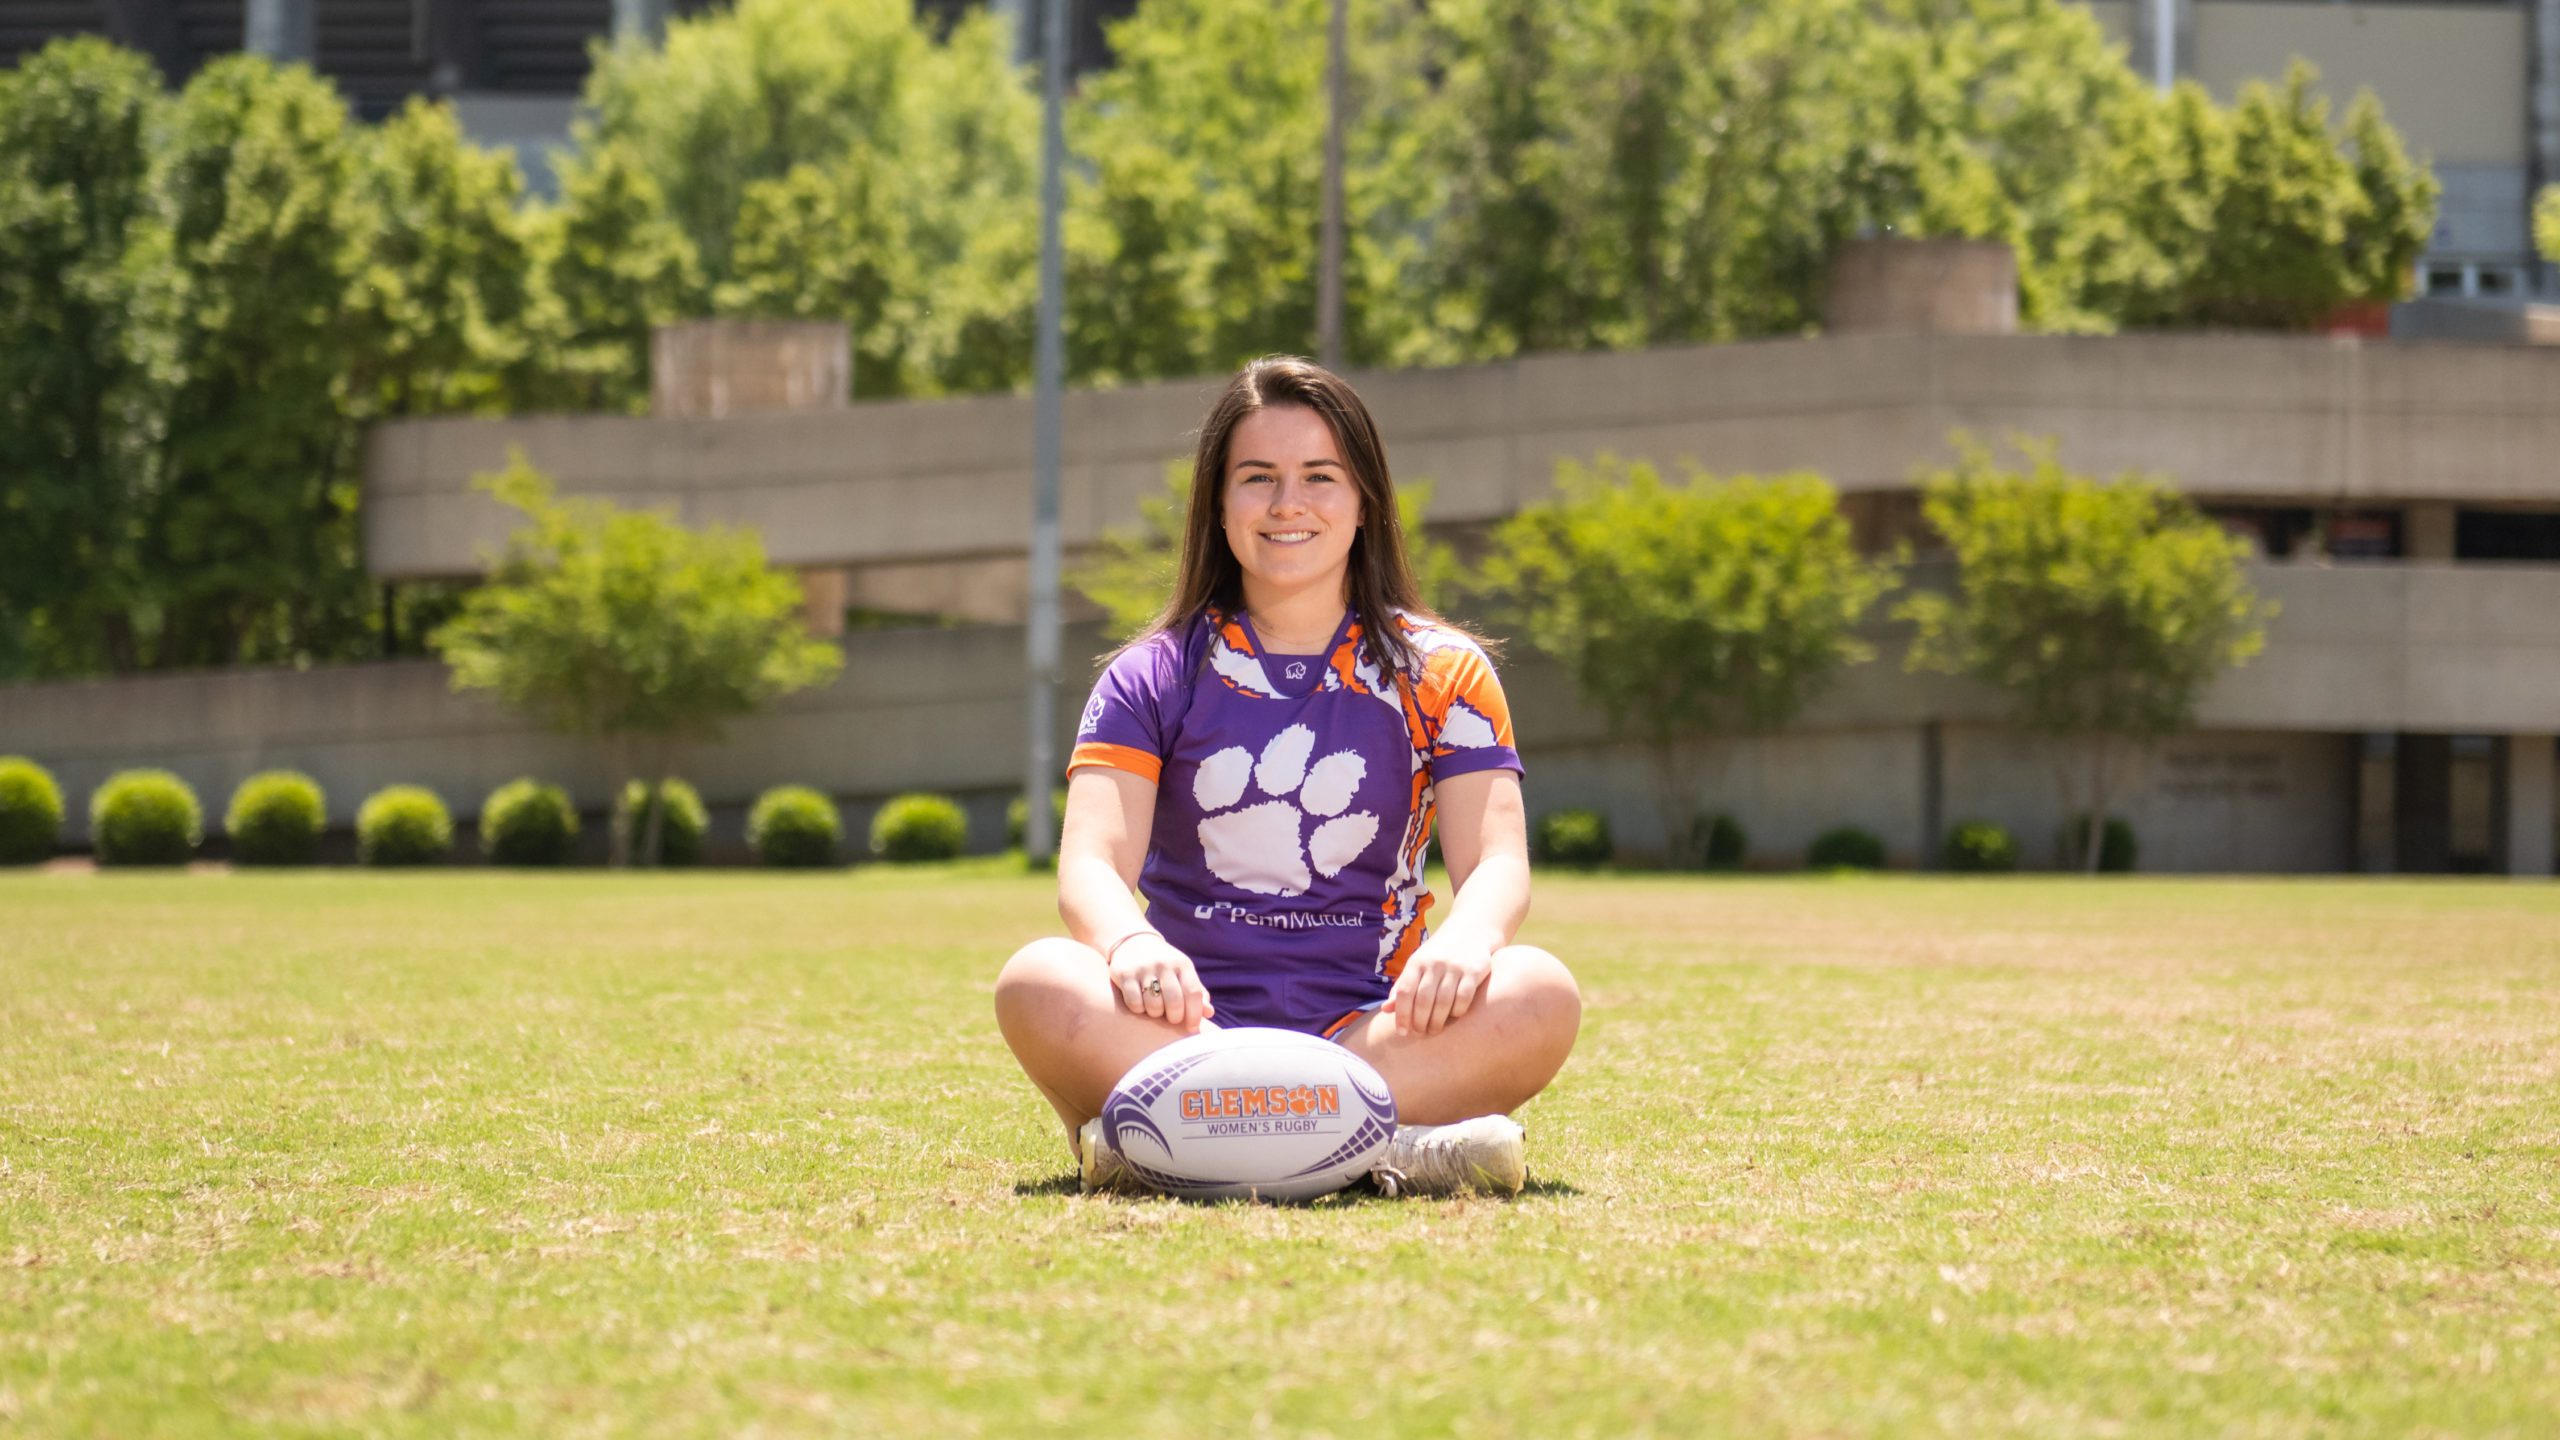 Deirdre Rocha was named All-American in women's club rugby for Fall 2021